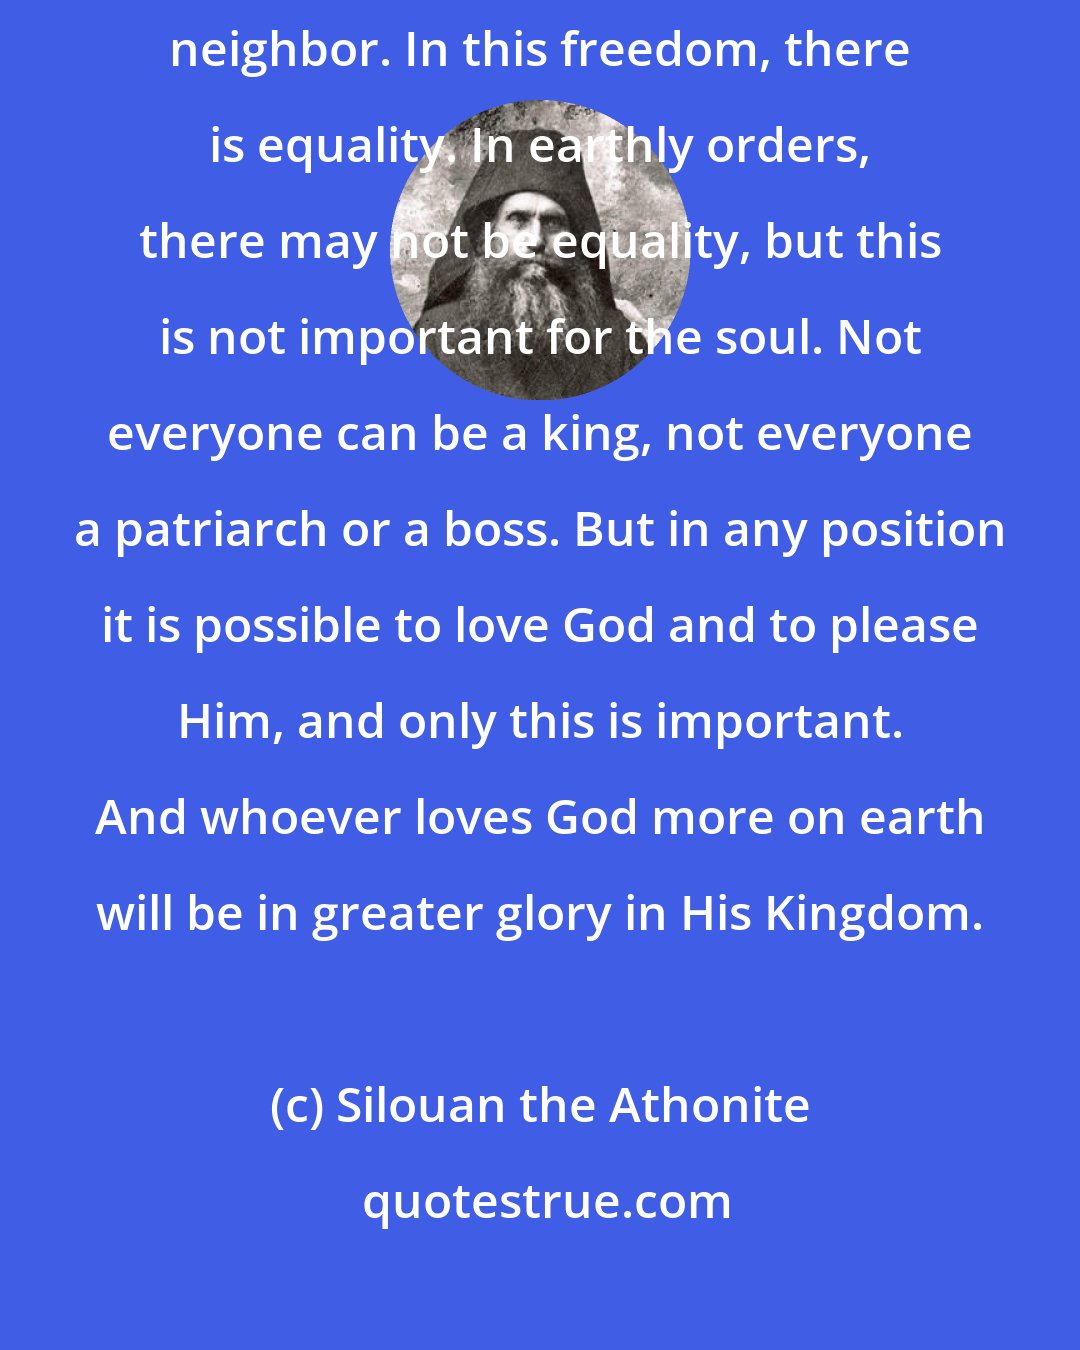 Silouan the Athonite: The Lord wants us to love one another. Here is freedom: in love for God and neighbor. In this freedom, there is equality. In earthly orders, there may not be equality, but this is not important for the soul. Not everyone can be a king, not everyone a patriarch or a boss. But in any position it is possible to love God and to please Him, and only this is important. And whoever loves God more on earth will be in greater glory in His Kingdom.